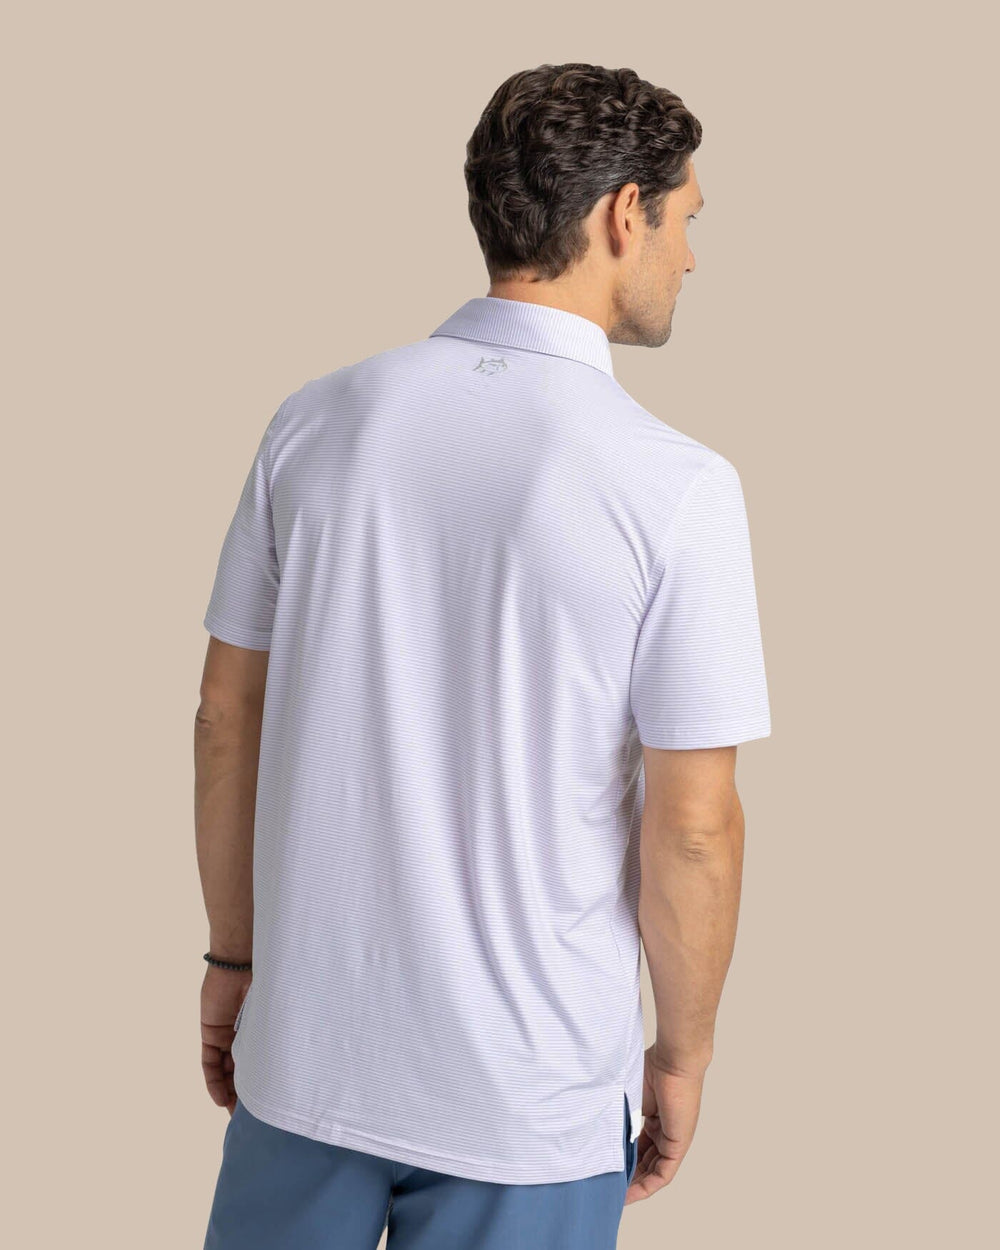 The back view of the Southern Tide brrr-eeze Meadowbrook Stripe Polo by Southern Tide - Orchid Petal